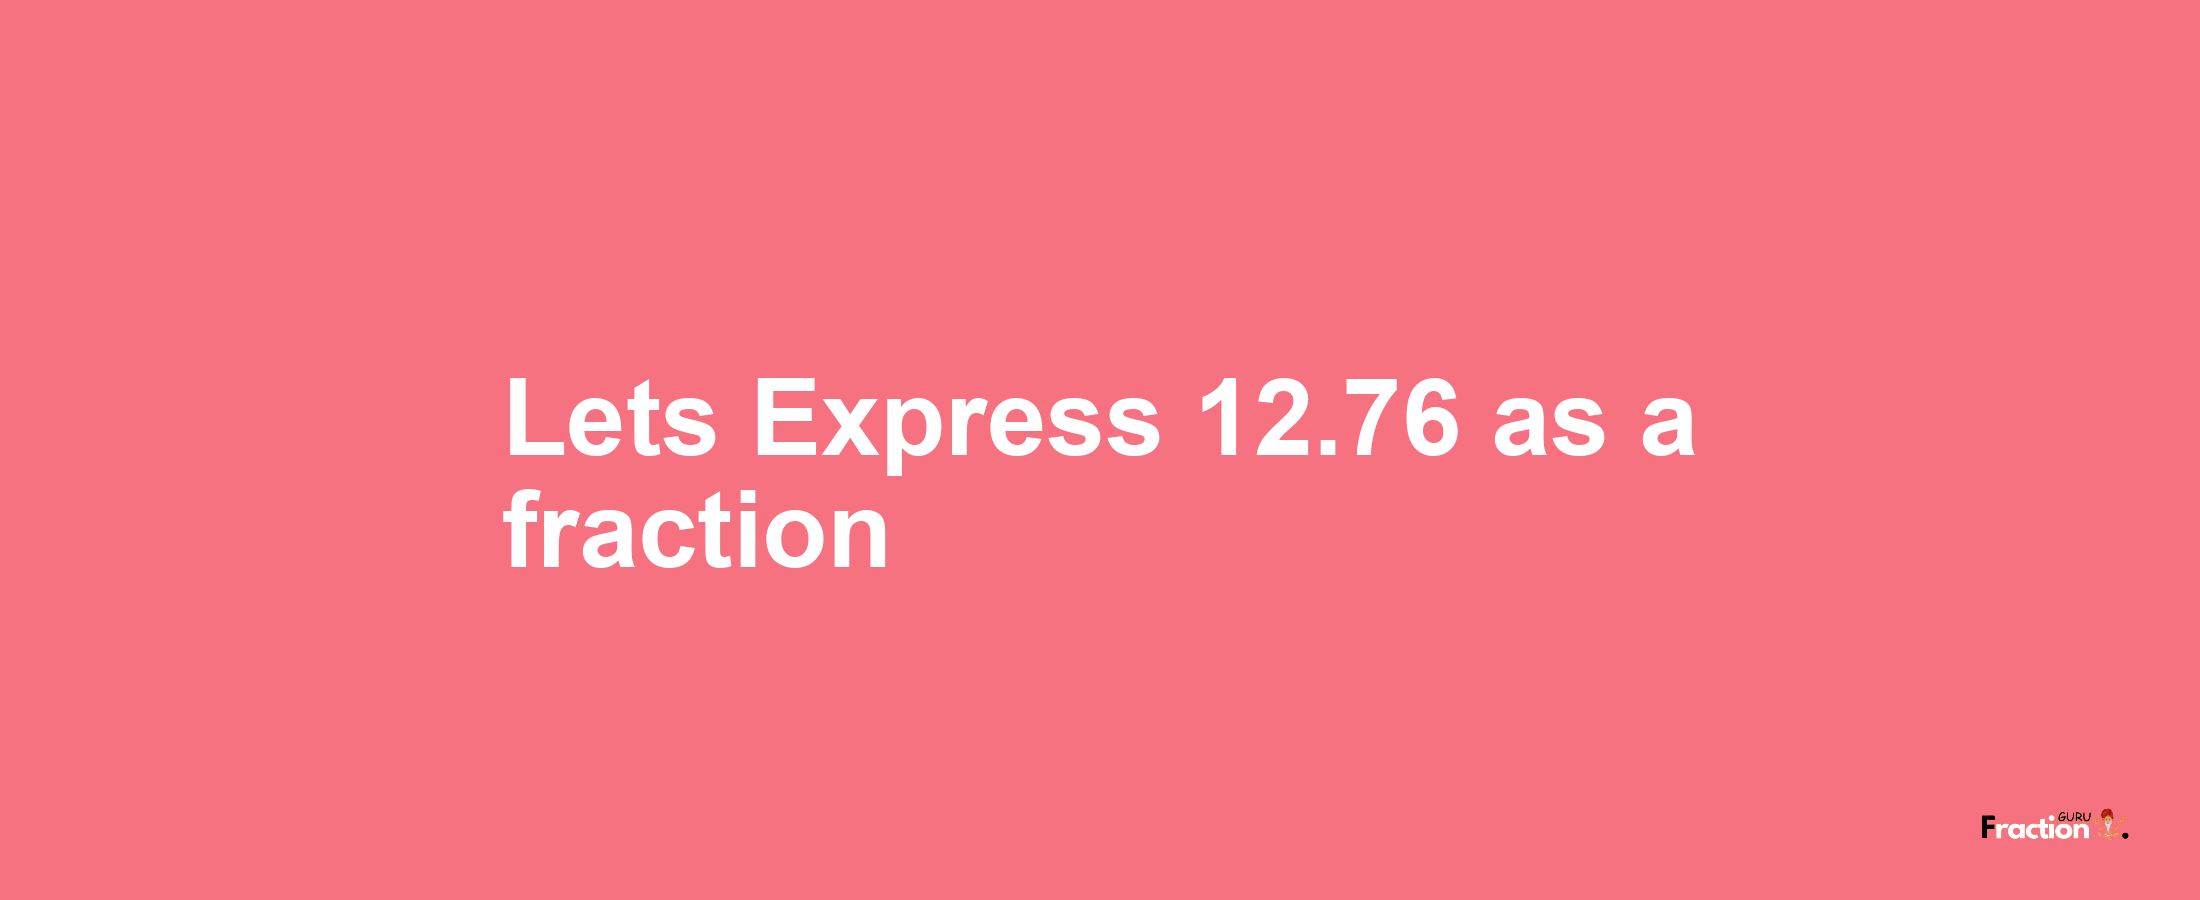 Lets Express 12.76 as afraction